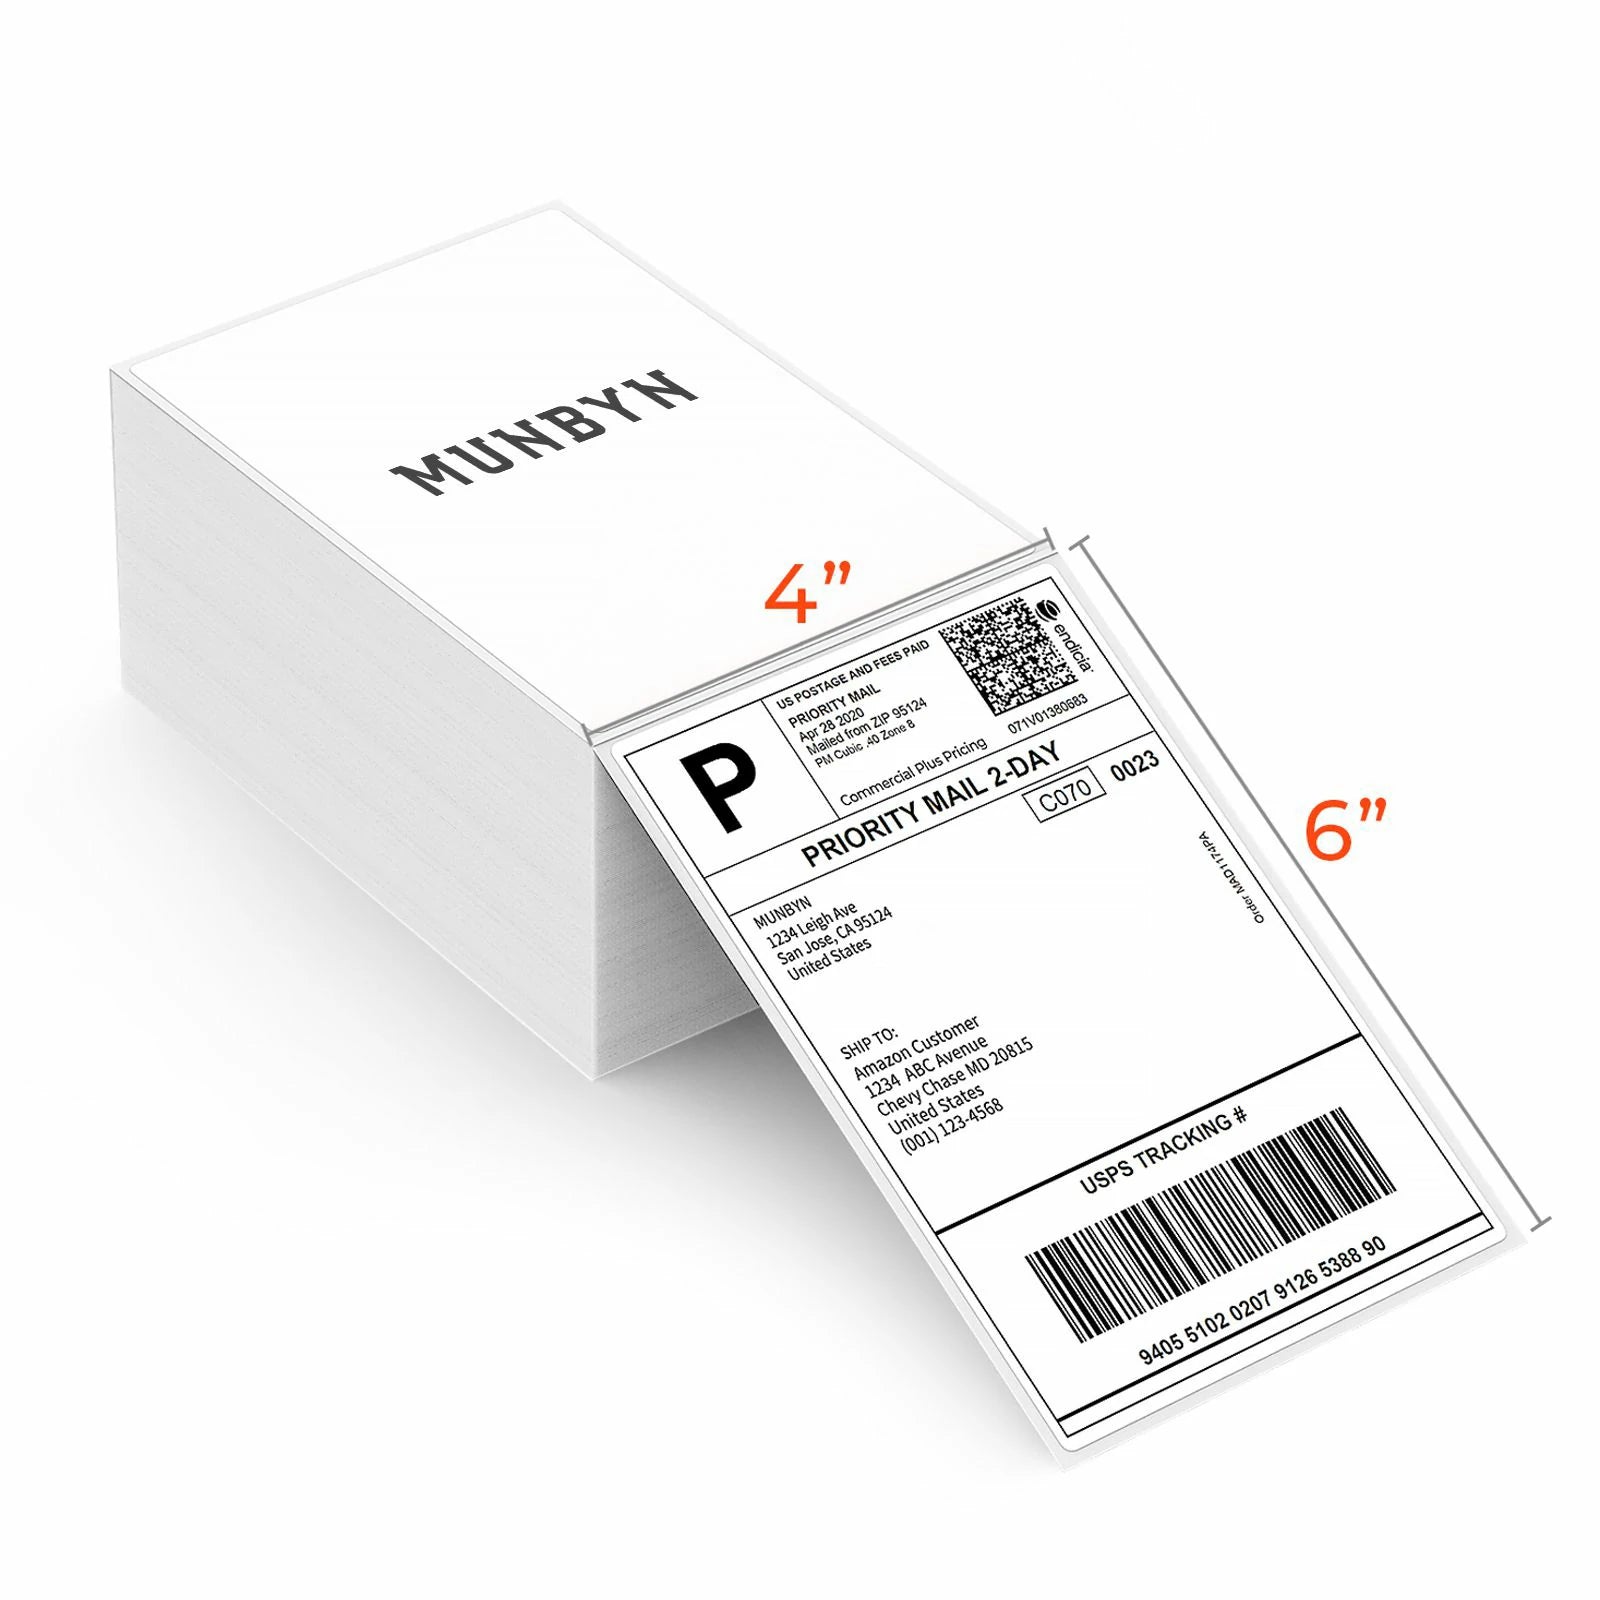 MUNBYN white thermal labels feature a 4x6 inch size, providing ample space for printing detailed information or images.